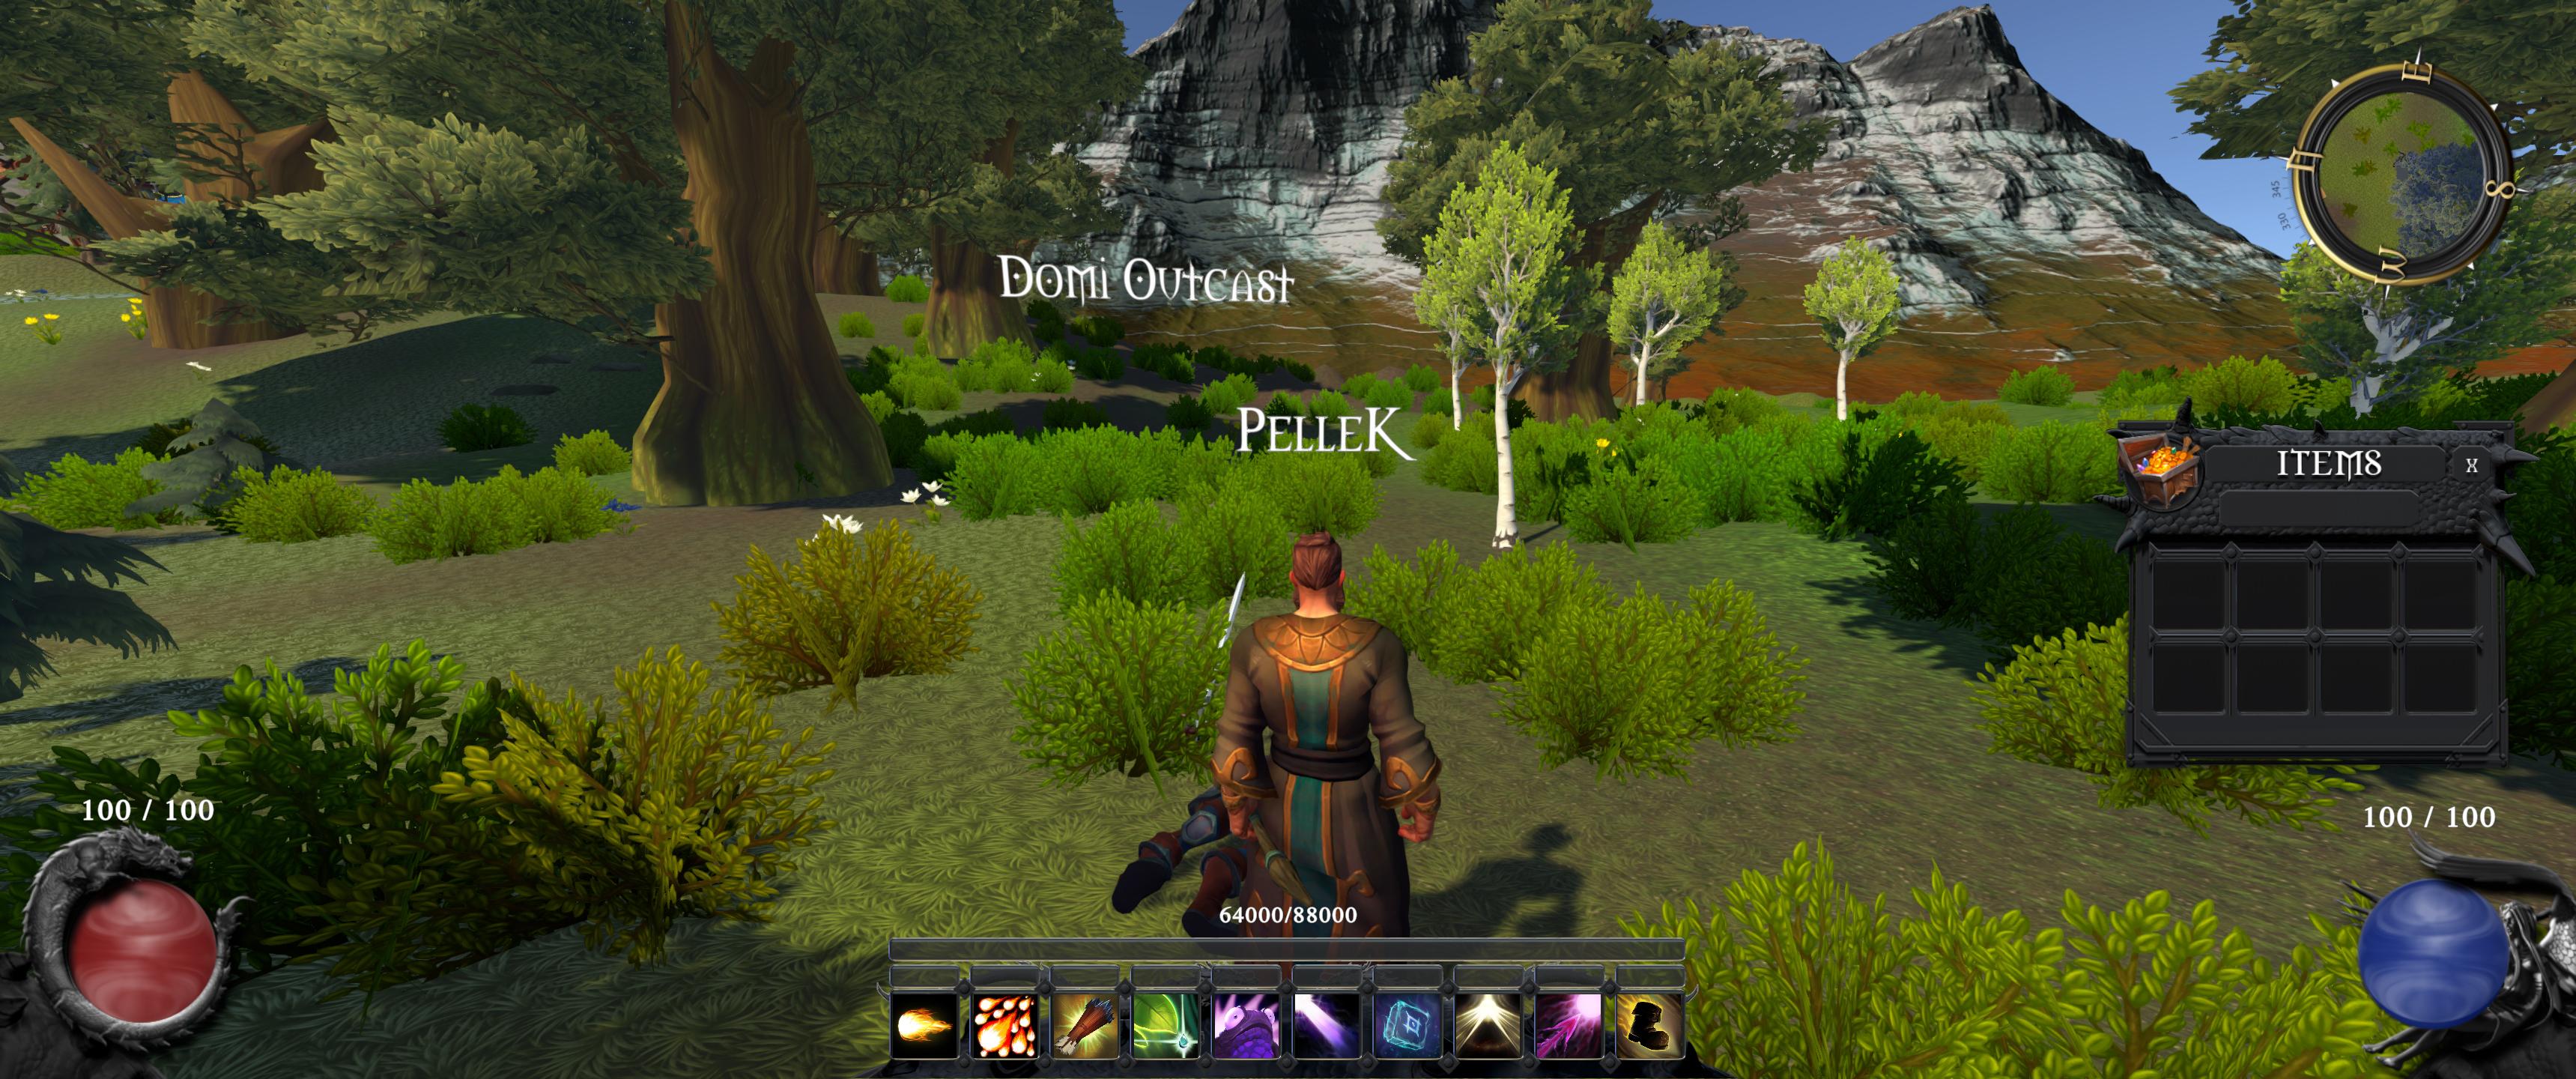 Domi Online is an MMORPG, Play-to-Earn, PvP and Multiplayer game, set in a medieval fantasy world where there is no level or skill cap, with death having severe consequences.